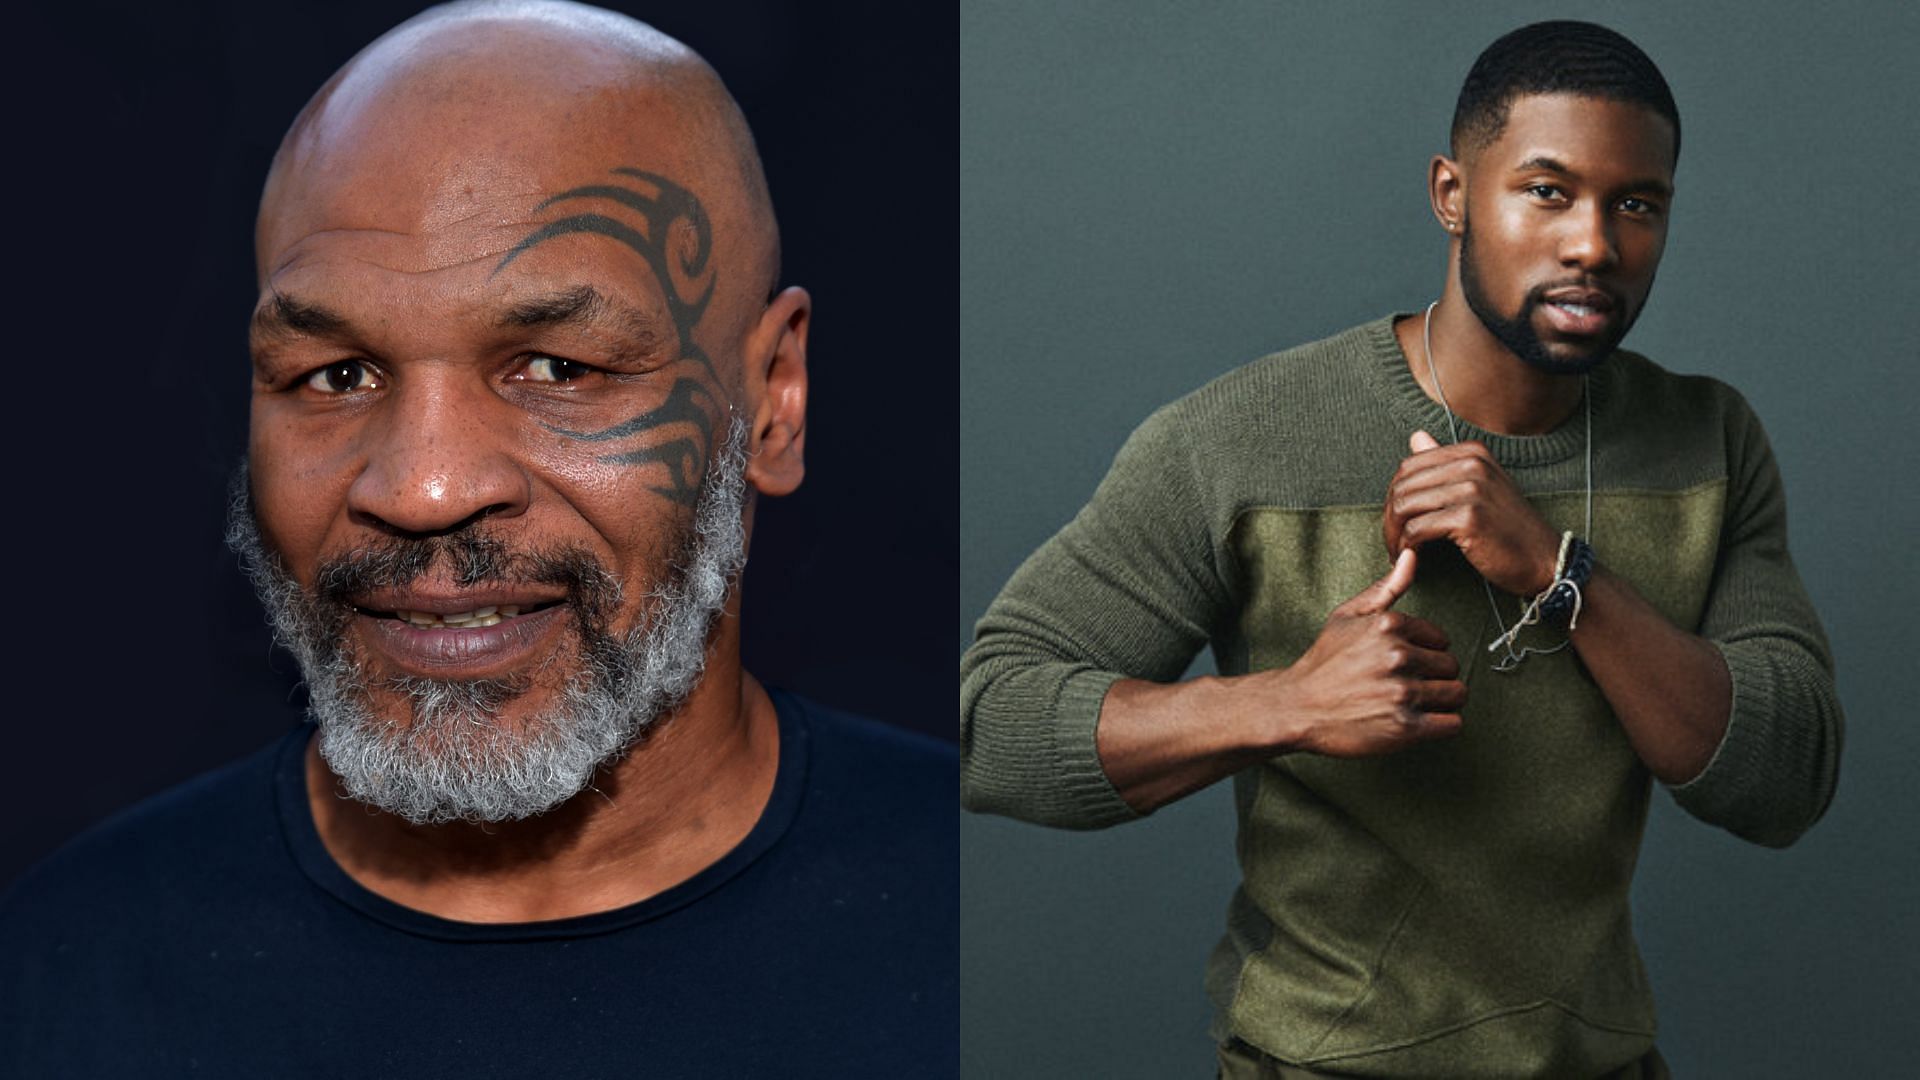 Mike Tyson (L) and Trevante Rhodes (R)